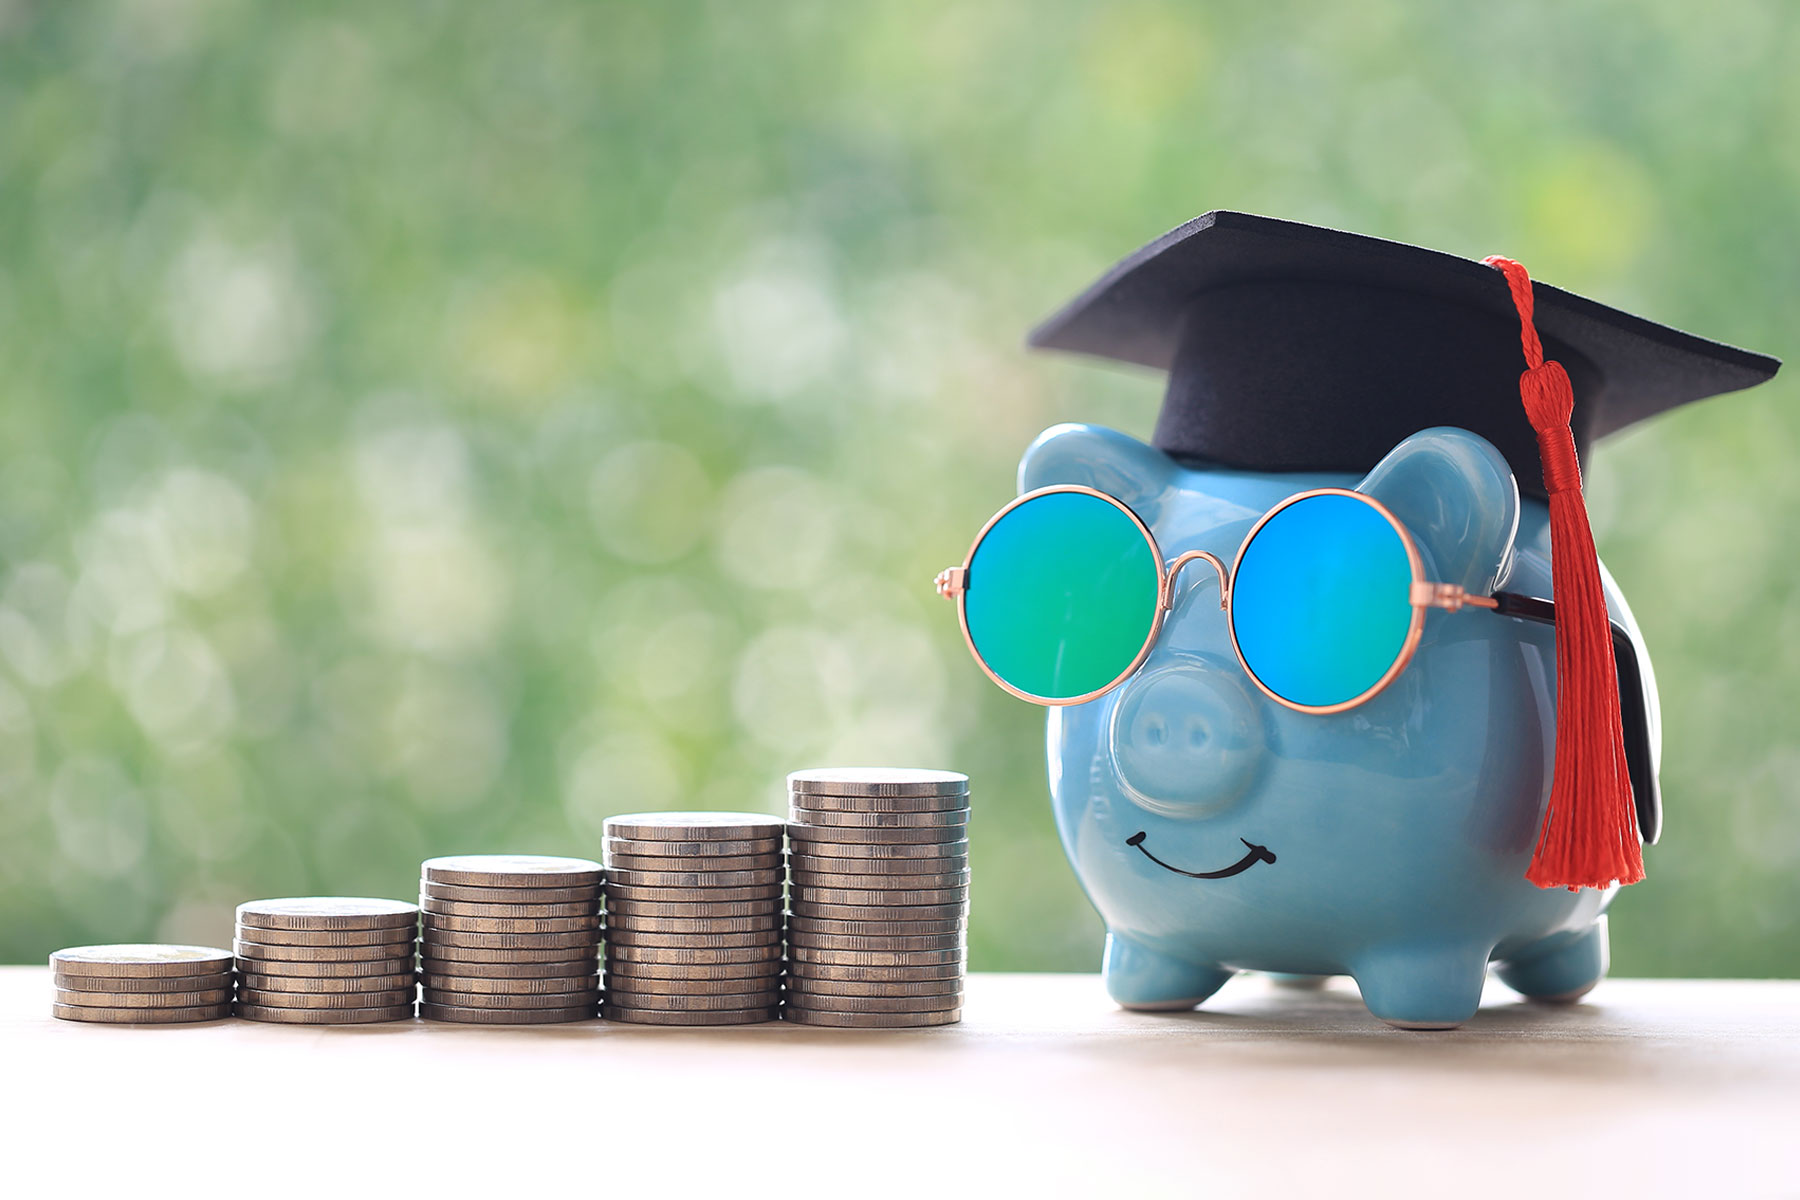 Graduation hat on piggy bank with stack of coins money on natural green background